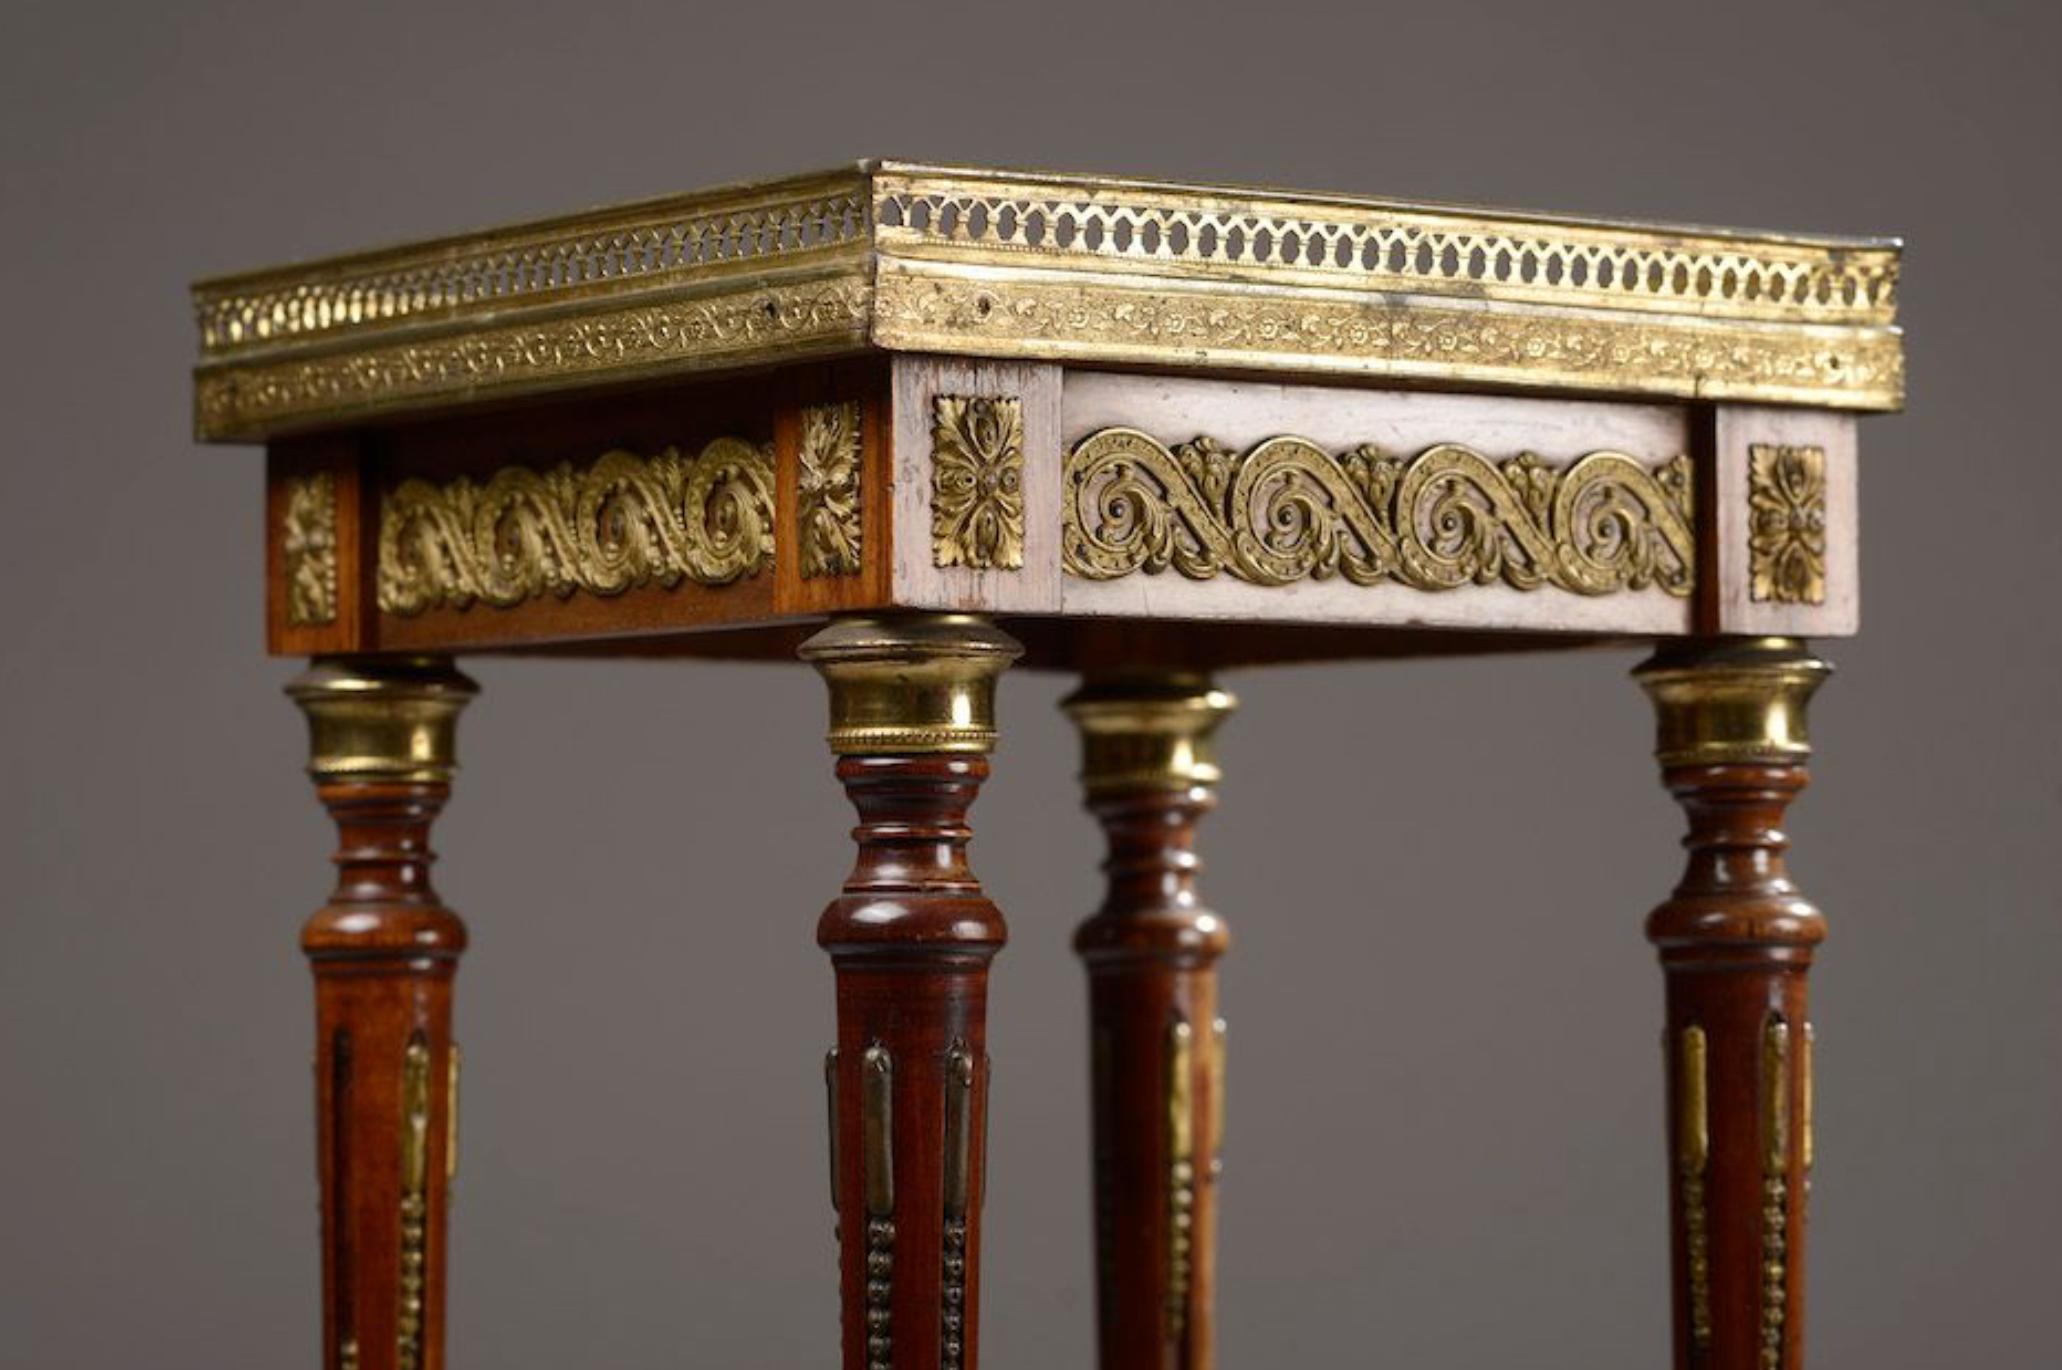 French side table in dark onyx plate square top and gallery, the four tapered and fluted uprights joined by a crotch shelf and finished with diverging legs. Chiselled and gilded bronze ornamentation such as rings, foliated sconces and post